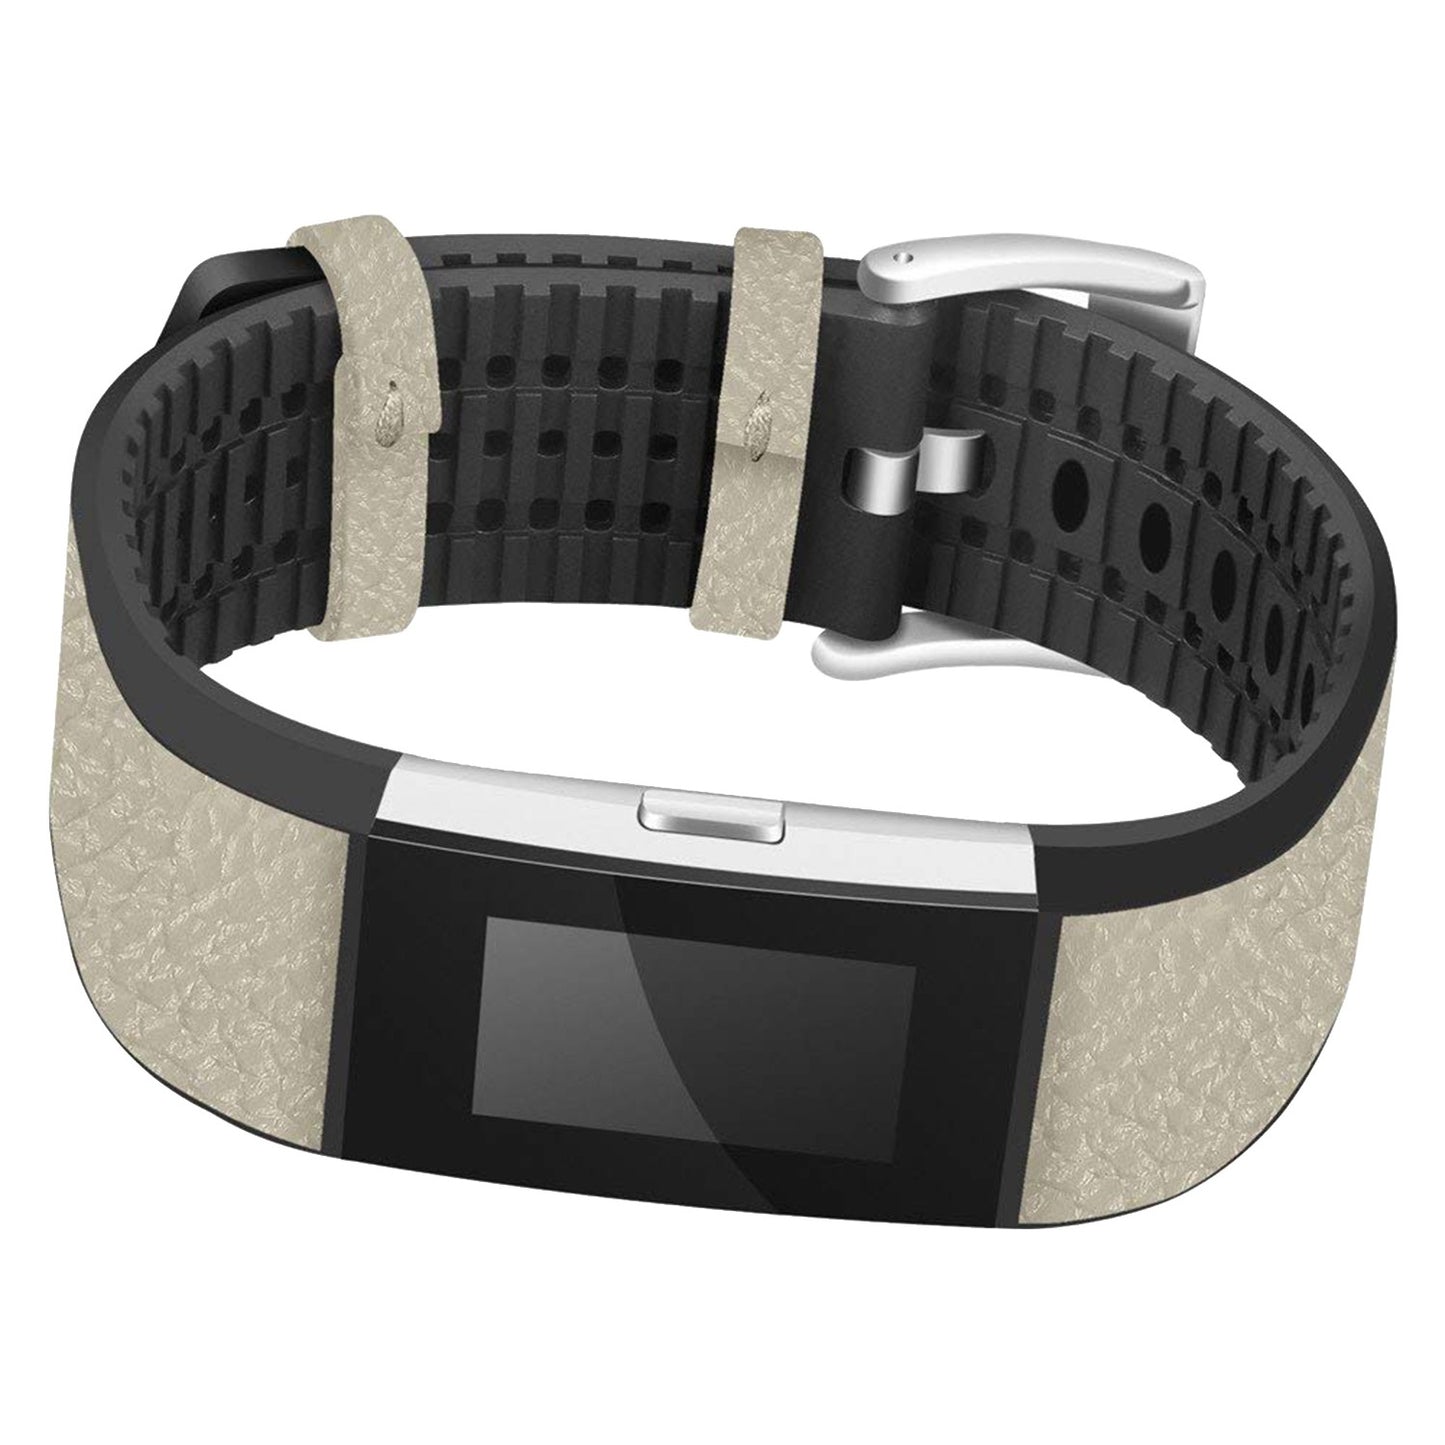 Rubber & Leather Strap for Fitbit Charge 2